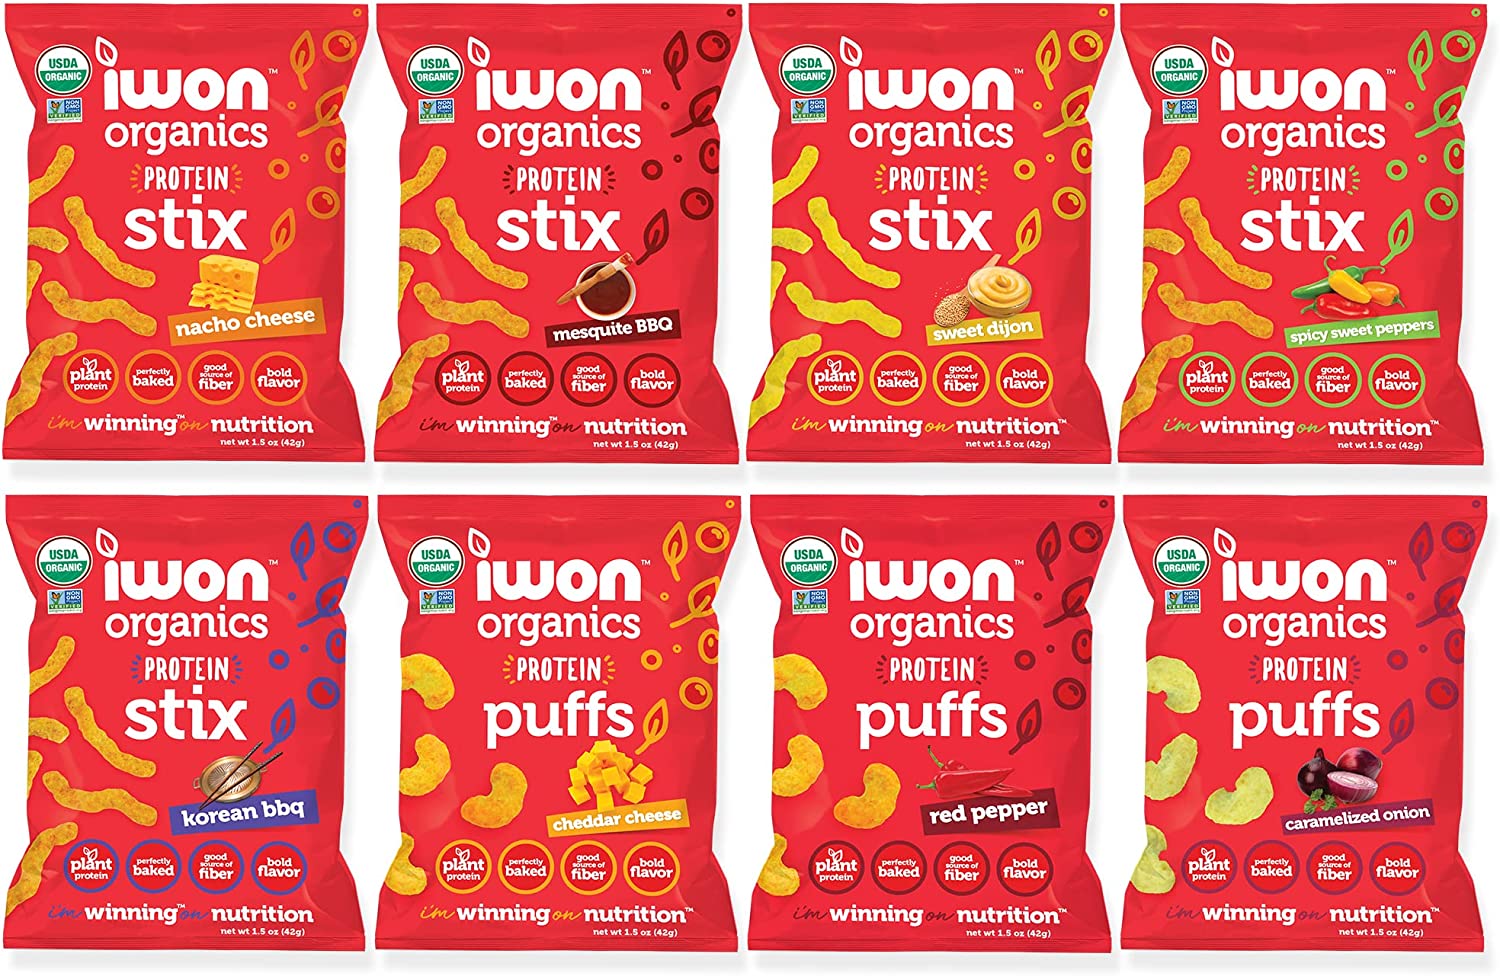 IWON Organics, Variety Pack of 8 Tasty Snacks, Protein Puffs and Snack Stix, High Protein and Organic Healthy Snacks, 8 Flavors, 8 Bags, 1.5 Ounce